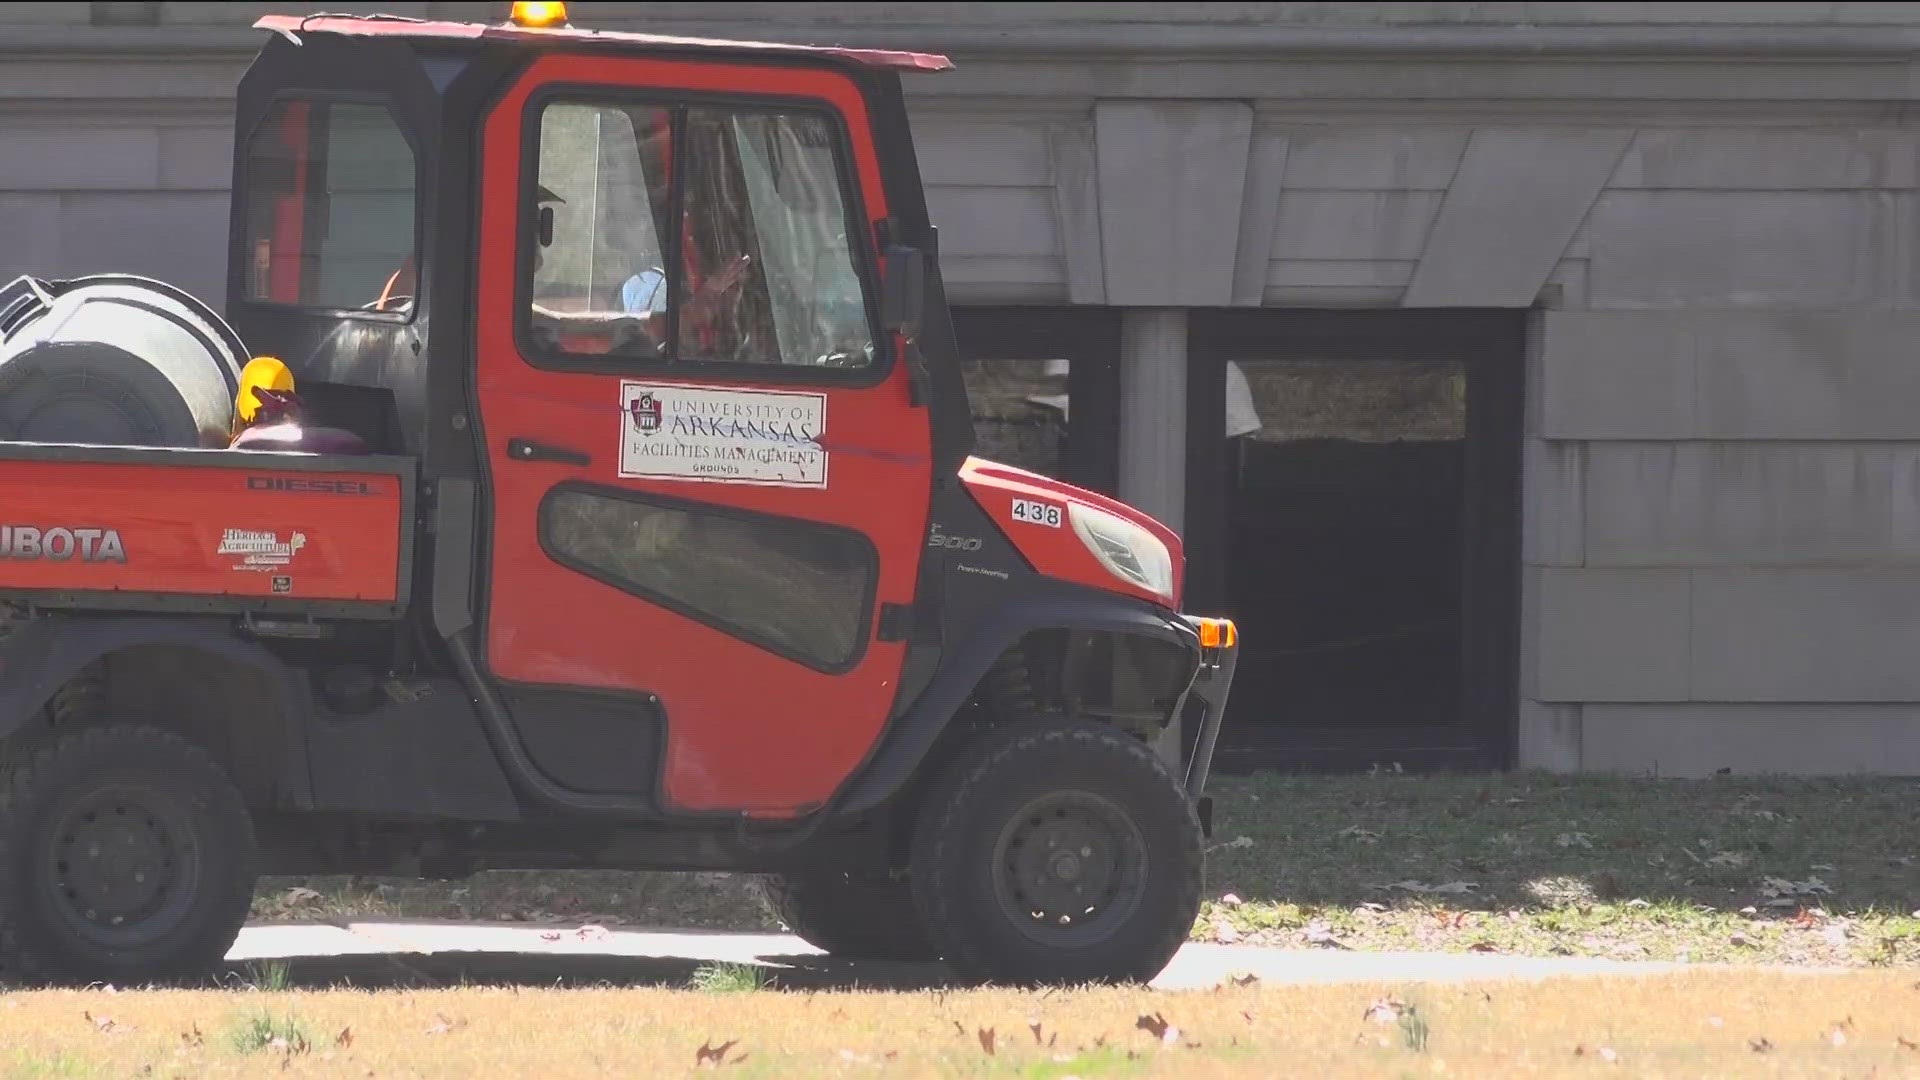 THE UNIVERSITY OF ARKANSAS IS CONSIDERING A PLAN TO OUTSOURCE ITS CUSTODIAL AND GROUNDS SERVICES...